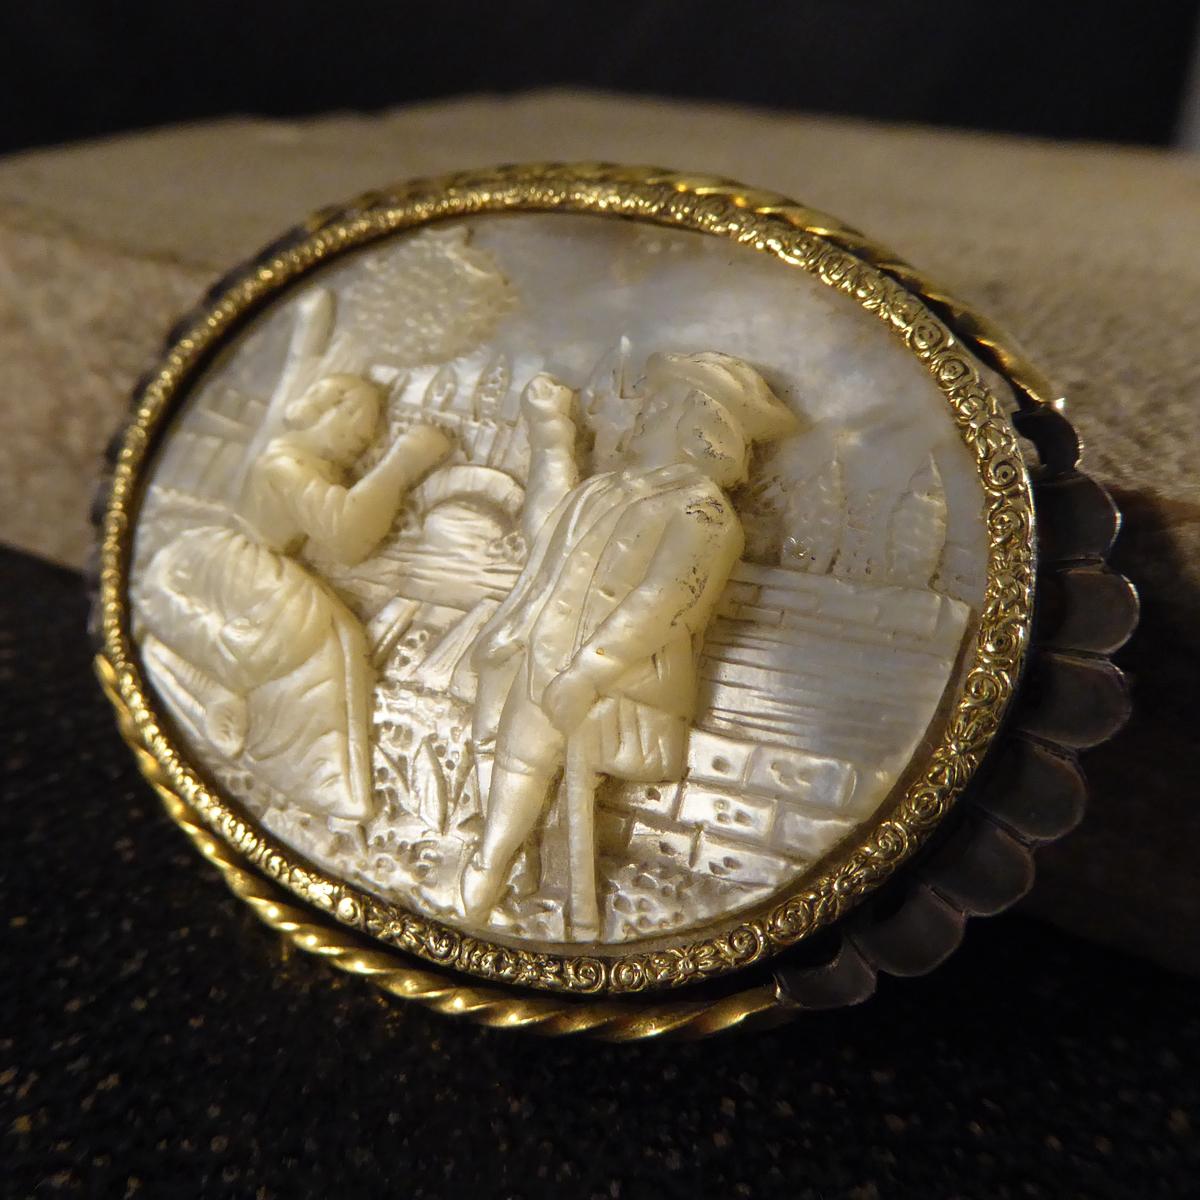 Such an exquisitely detailed carved Mother of Pearl, showing a scene between a man and women. The surround of the Mother of Pearl is intricate design in Gold with a Gold and Silver halo to accompany. This 17th Century carving looks to have